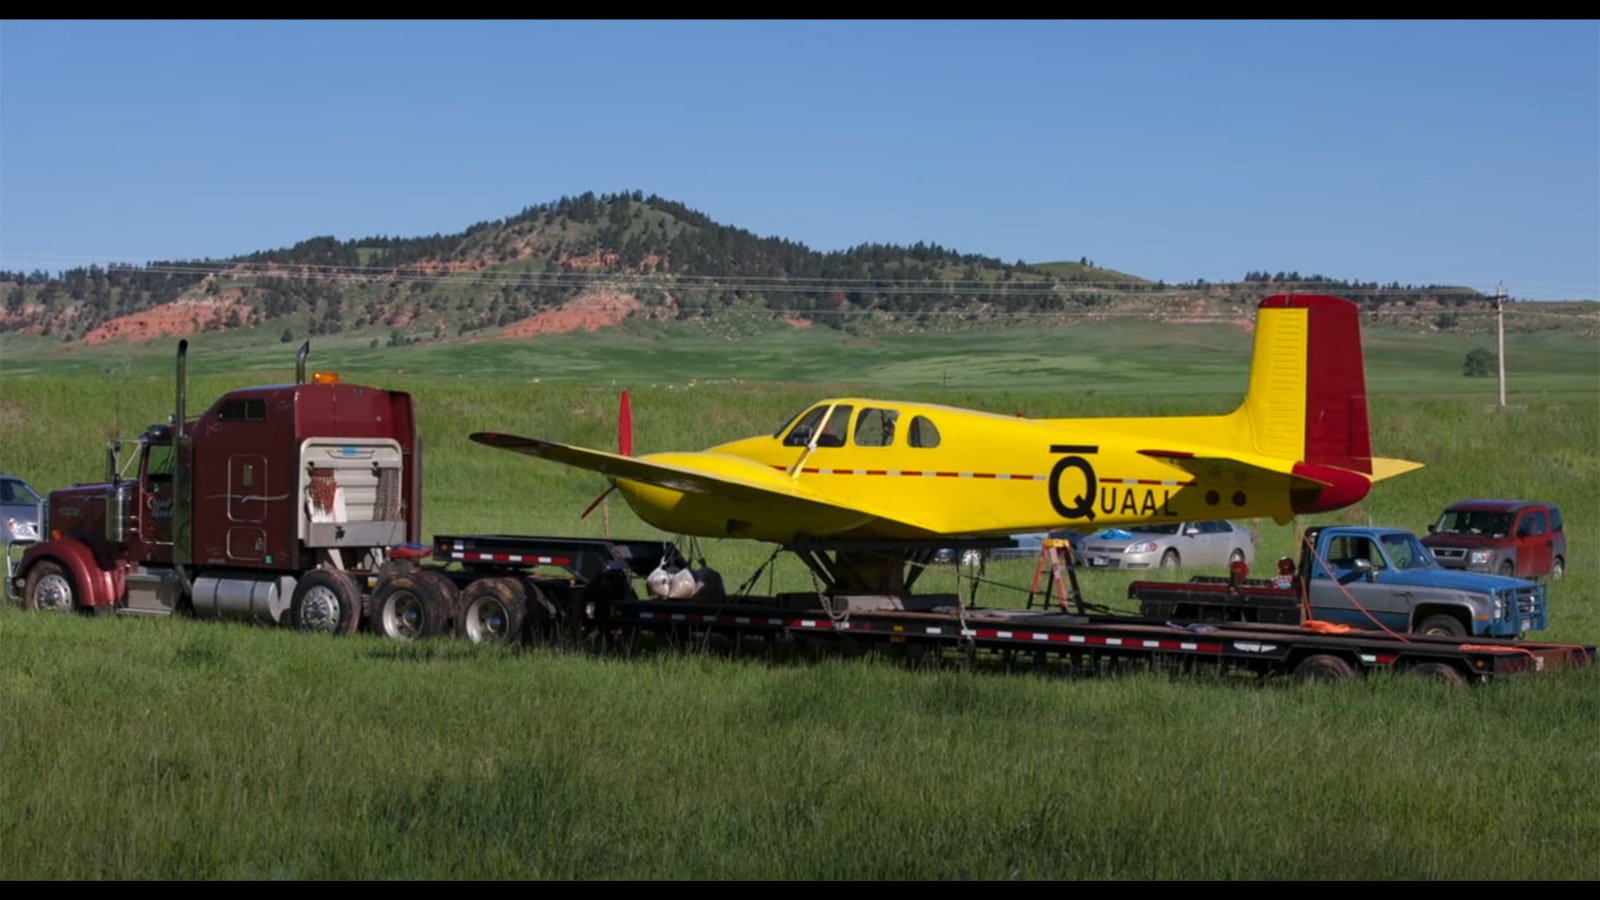 A truck moves the vintage Beechcraft Twin Bonanza plane into position to be placed on a pole as a wind sock nine years ago.